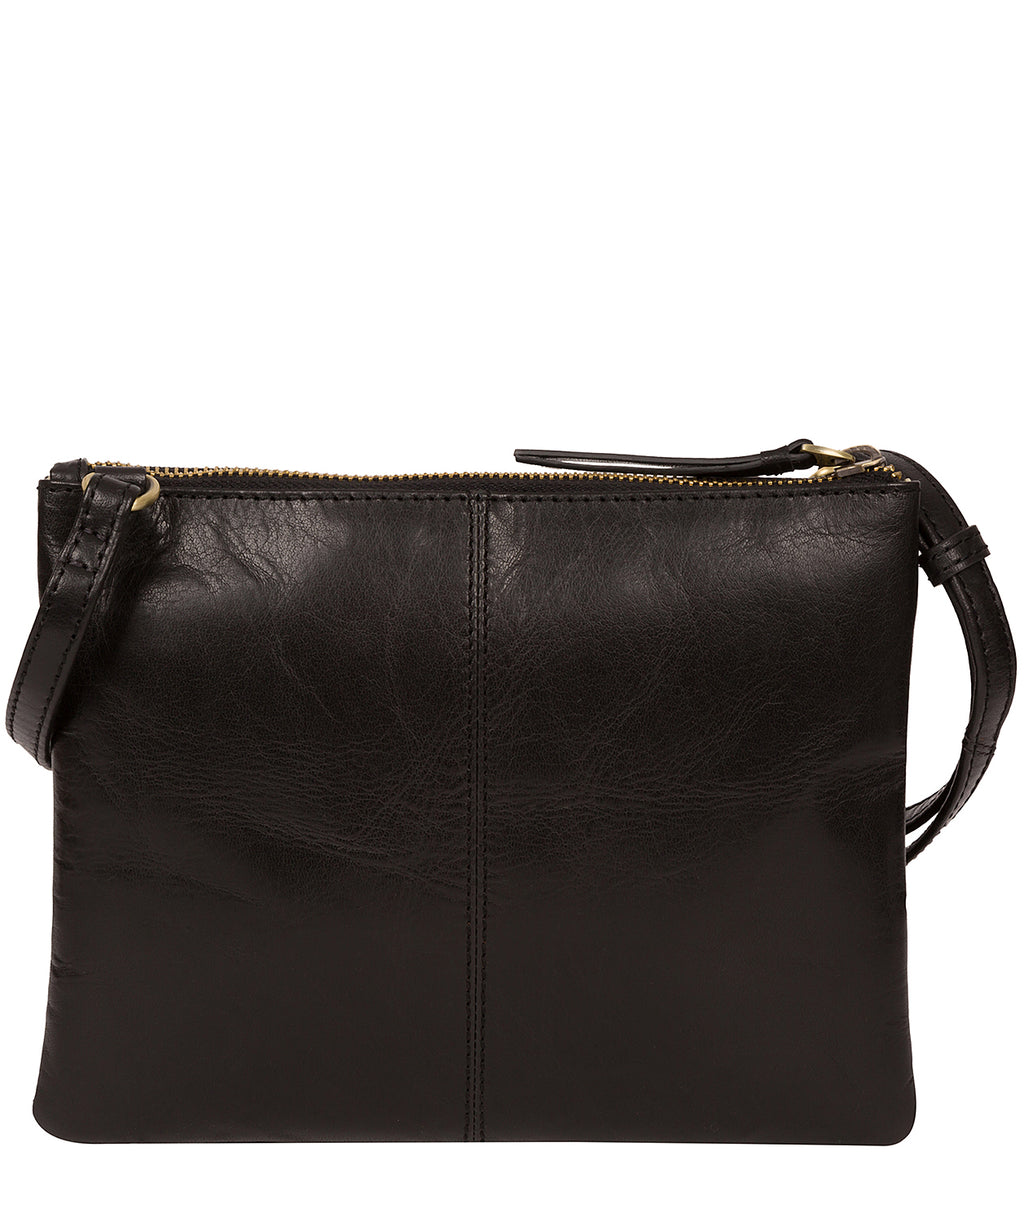 Black Leather Crossbody Bag 'Tillie' by Conkca London – Pure Luxuries ...